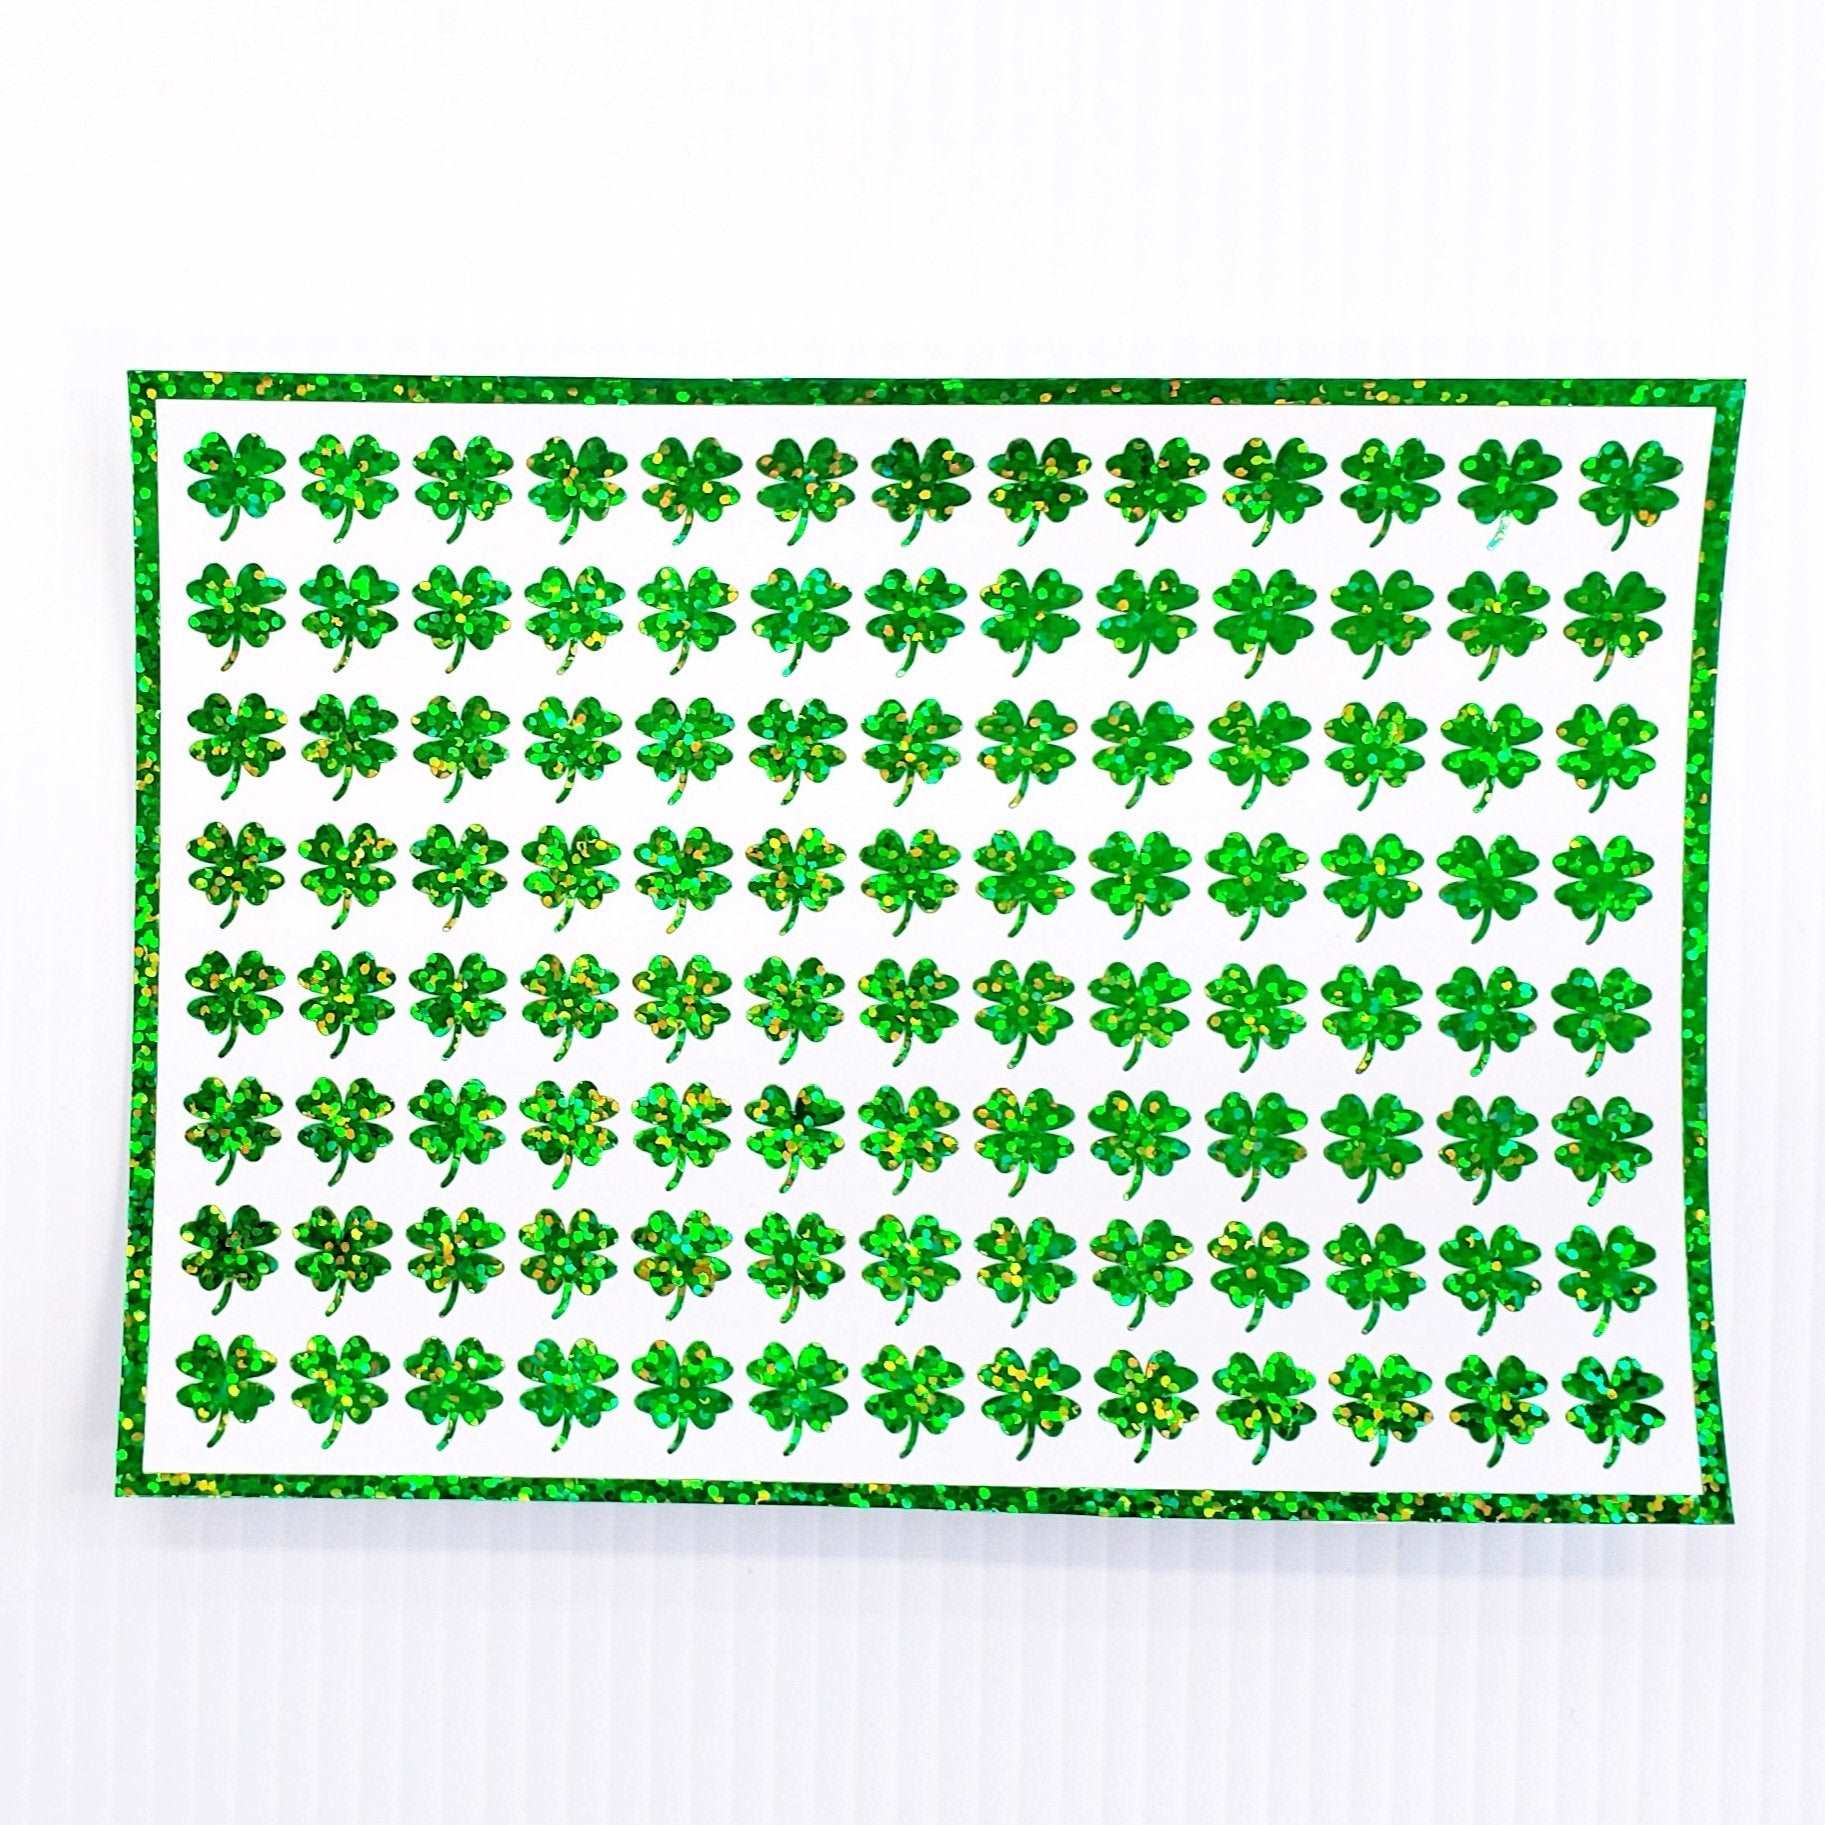 Green Clovers Sticker Sheet. Set of 104 four leaf clover glitter vinyl decals for teachers, journals and crafts. St. Patrick's Day Stickers.